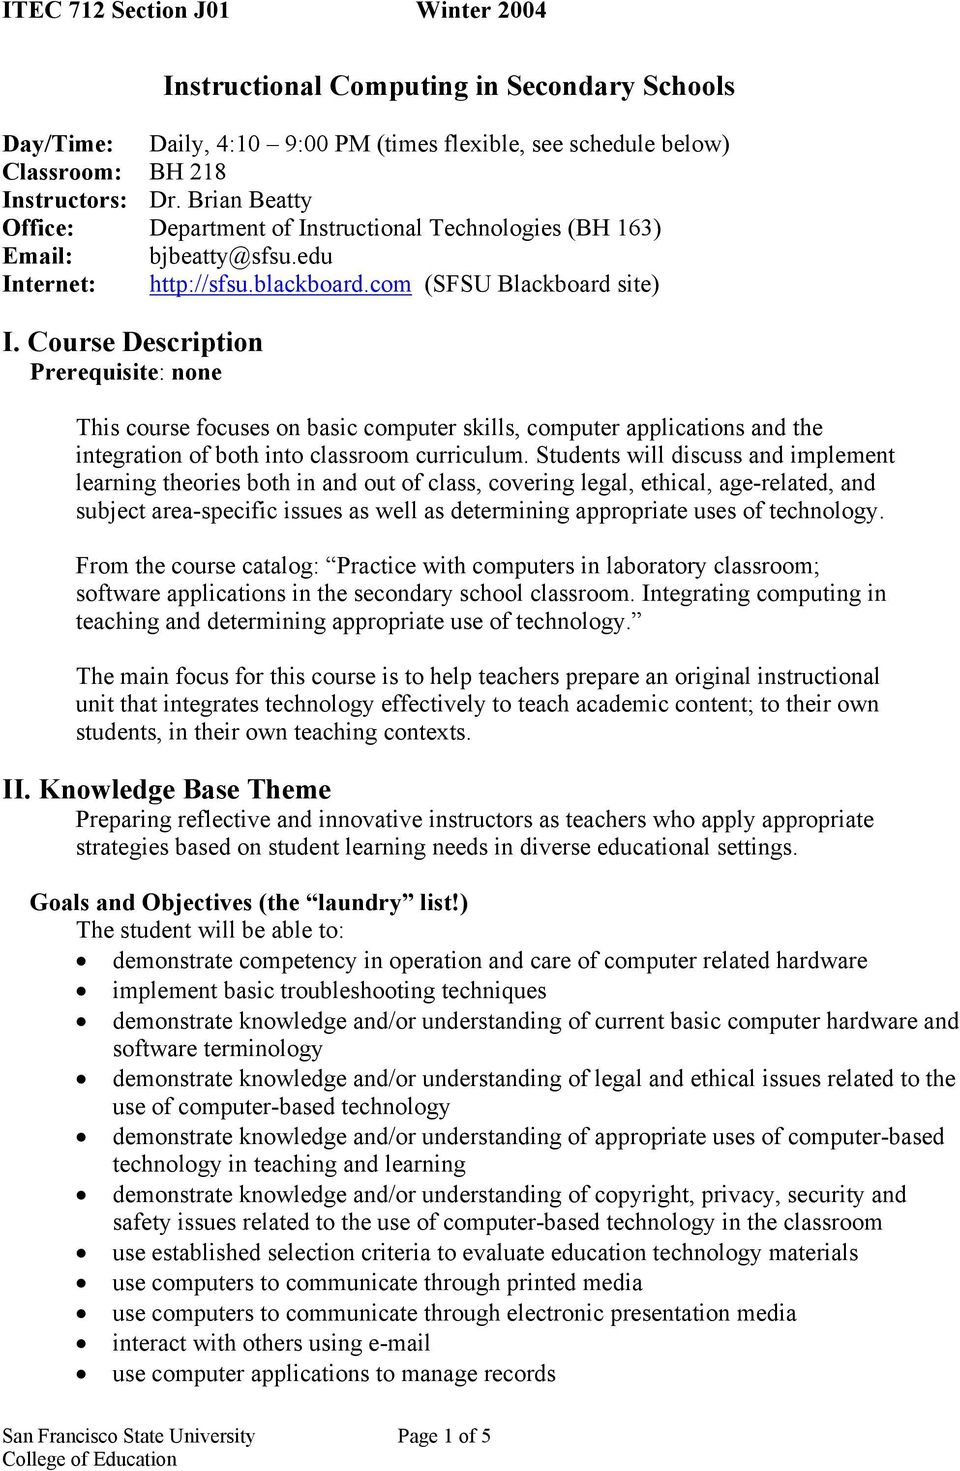 Course Description Prerequisite: none This course focuses on basic computer skills, computer applications and the integration of both into classroom curriculum.